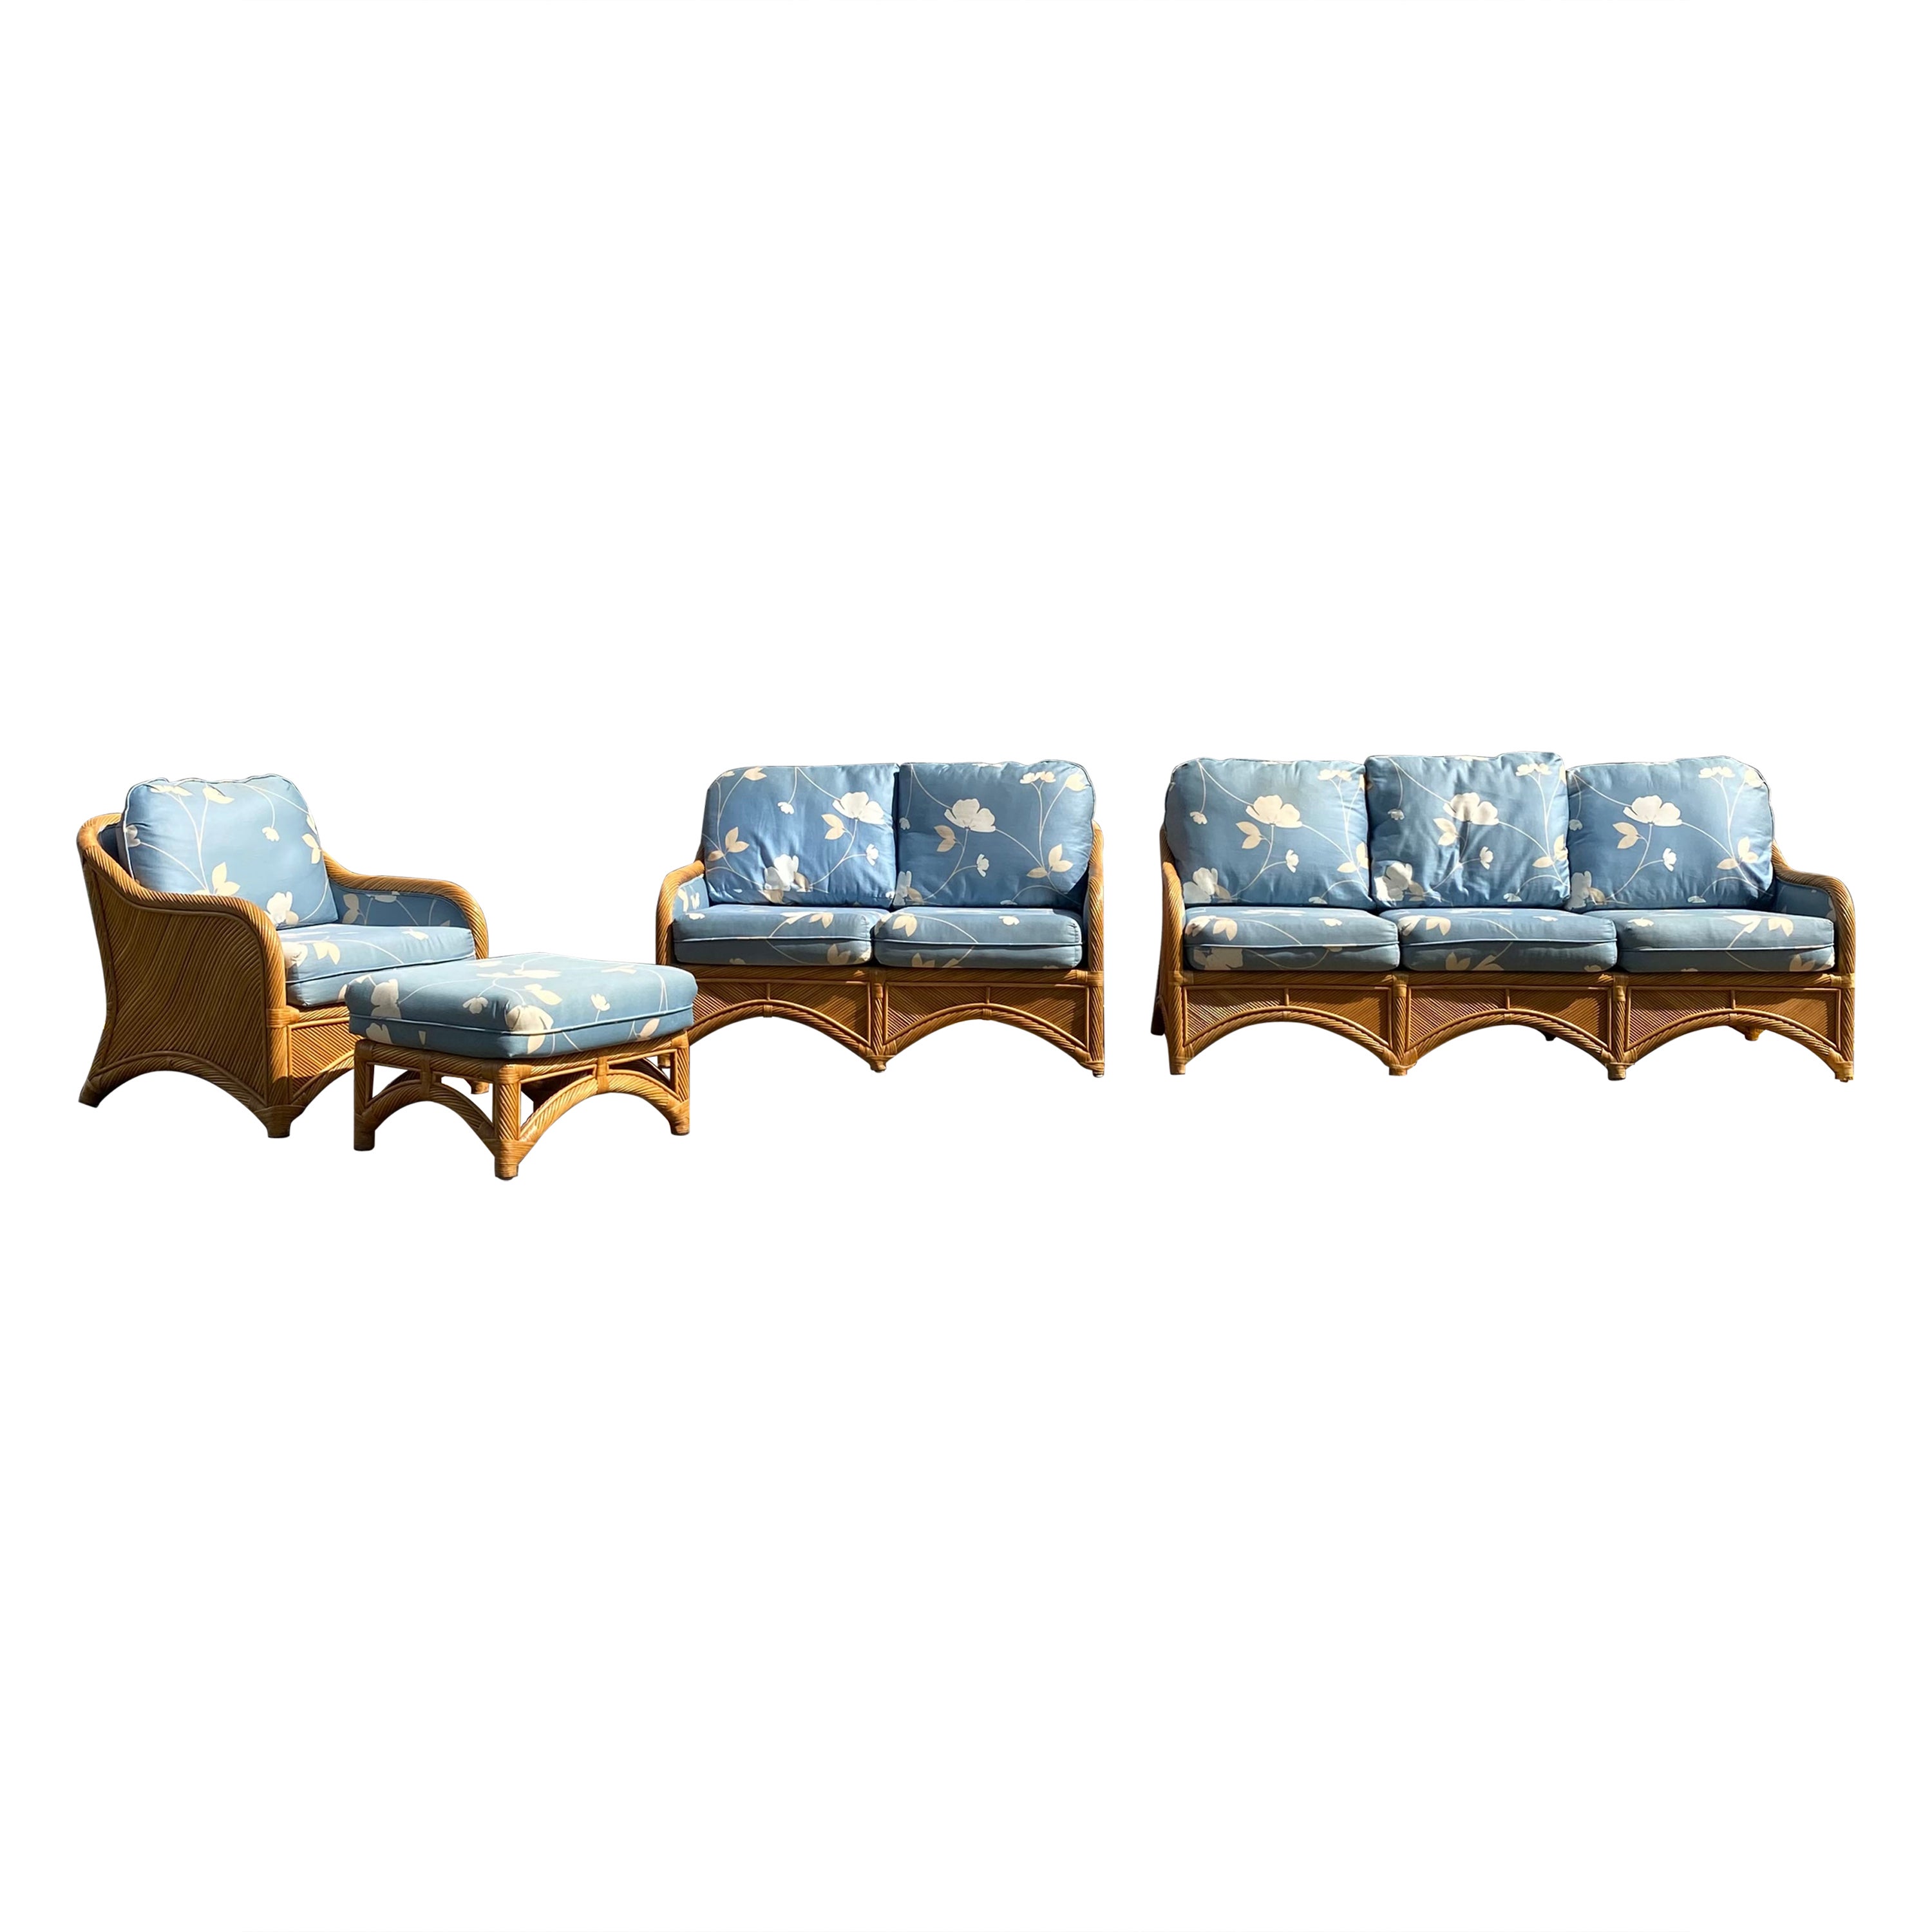 1970s Rattan Reed Sculptural Chinoiserie Style Blue White Sofa Suite, Set of 4 For Sale